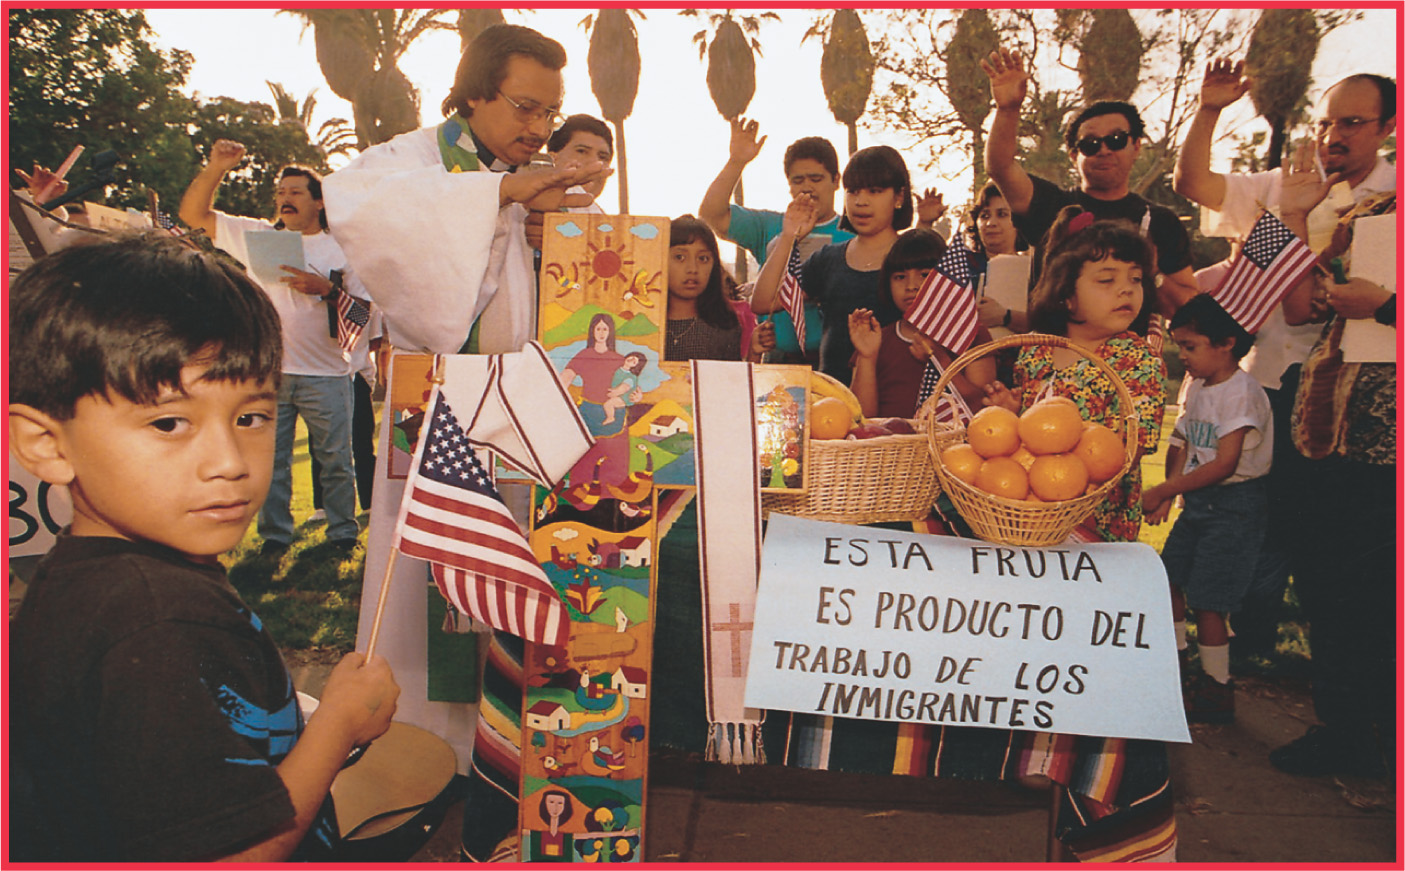 photo: Latino people hold American flags and signs in Spanish.